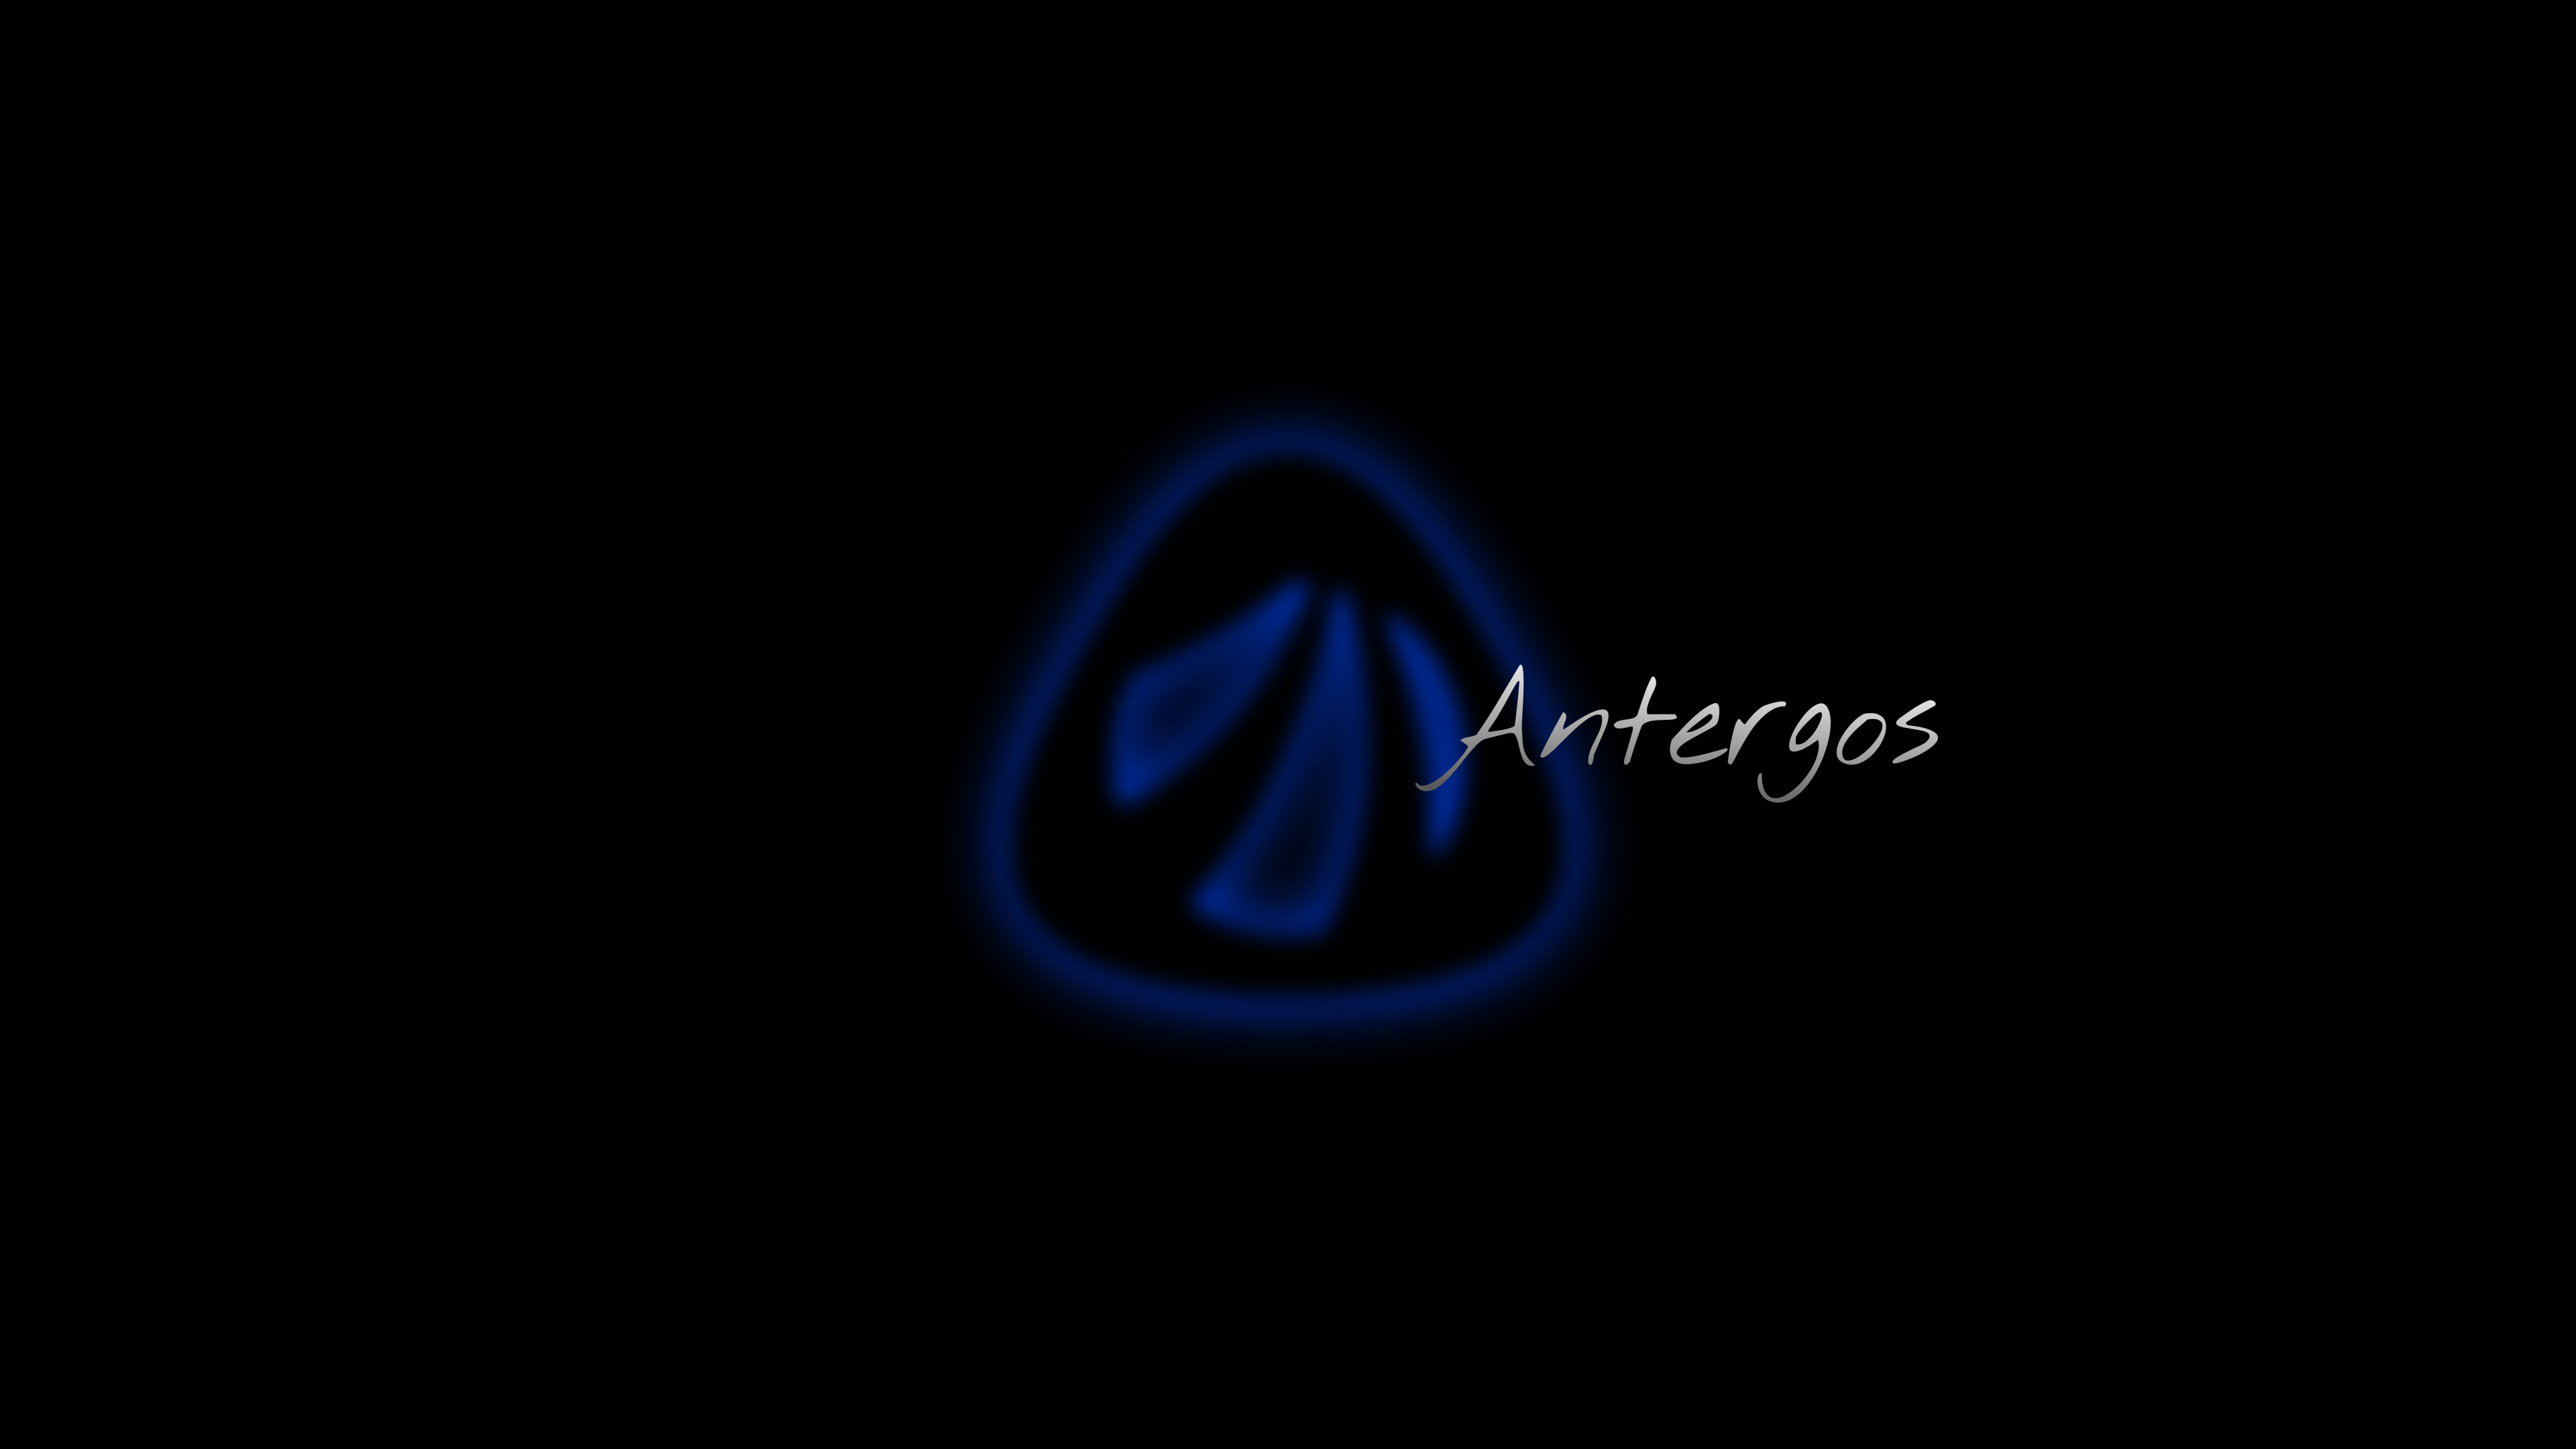 A couple black and blue Antergos wallpaper. If anyone wants a